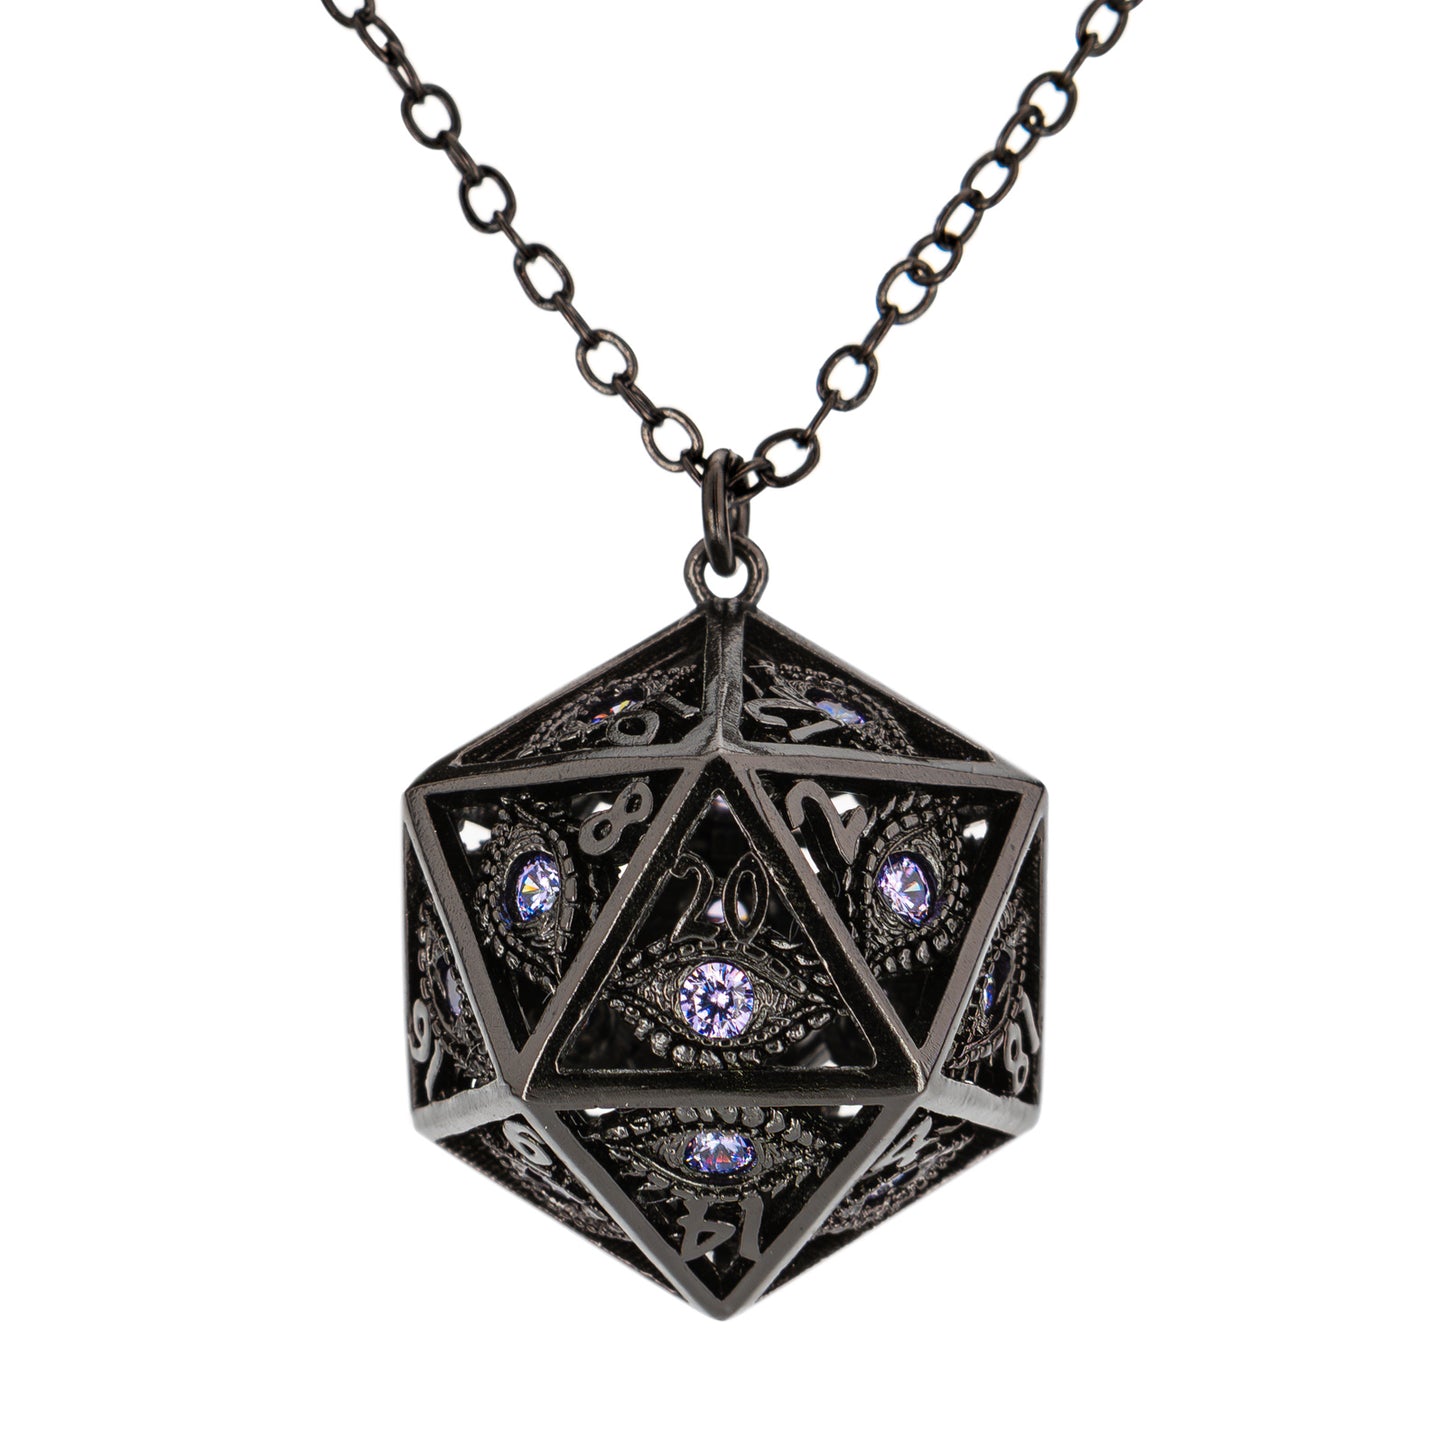 Handmade sterling silver 925 dragon D20 necklace – HYMGHO Dice